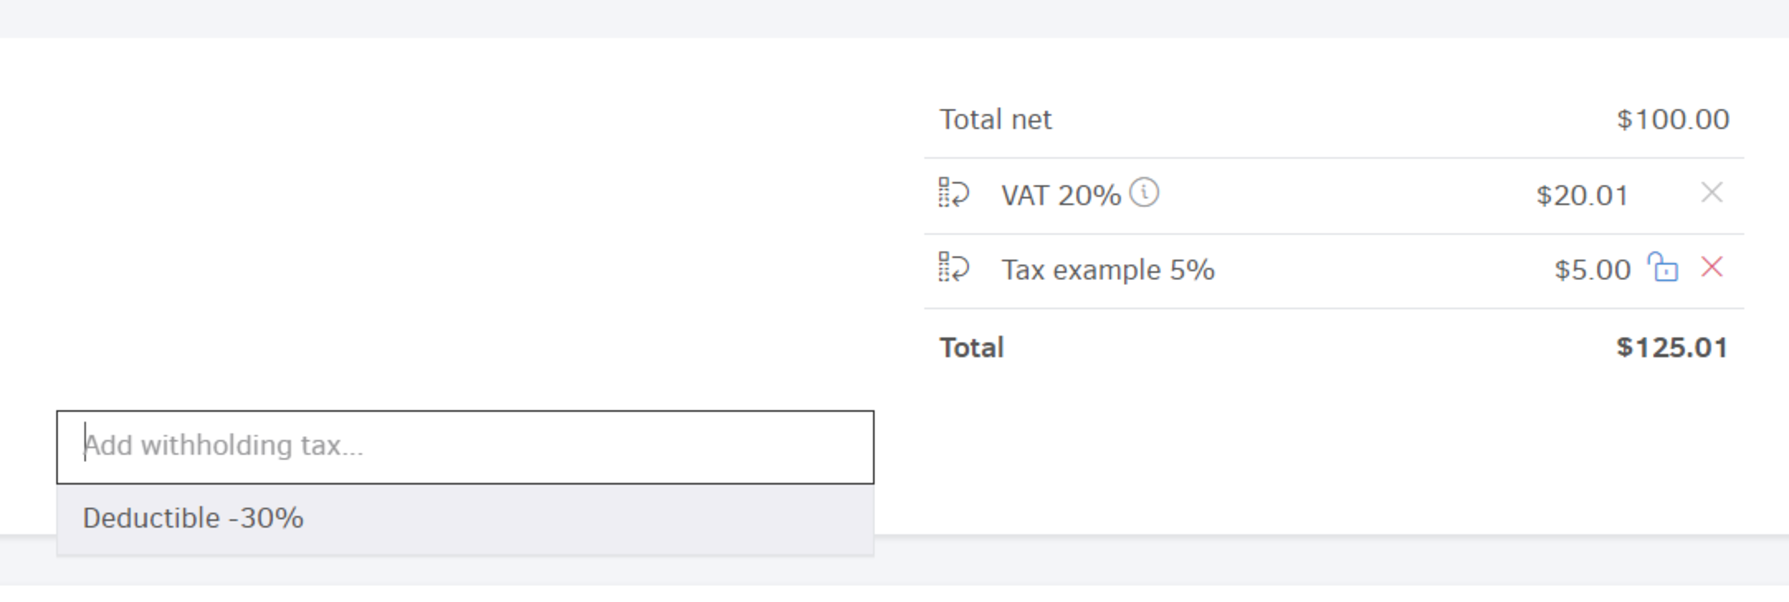 Self billed invoice - add withholding tax